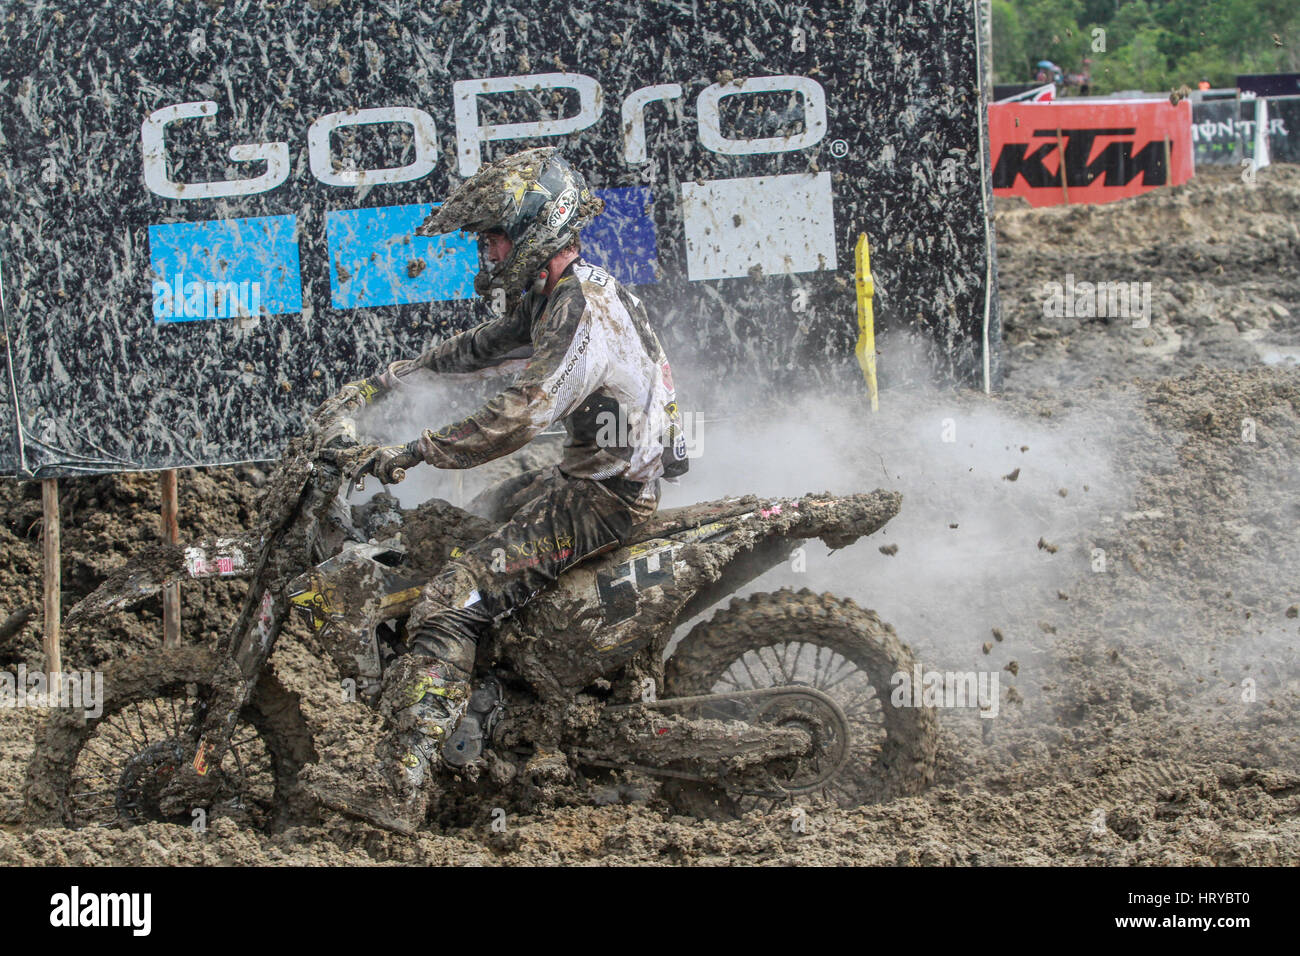 Pangkalpinang, Indonesia. 05th Mar, 2017. Racer covered in mud at motocross  MXGP Indonesia Grand Prix on March 5, 2017 in Pangkalpinang City.  Torrential rain ahead of the Grand Prix of Indonesia have